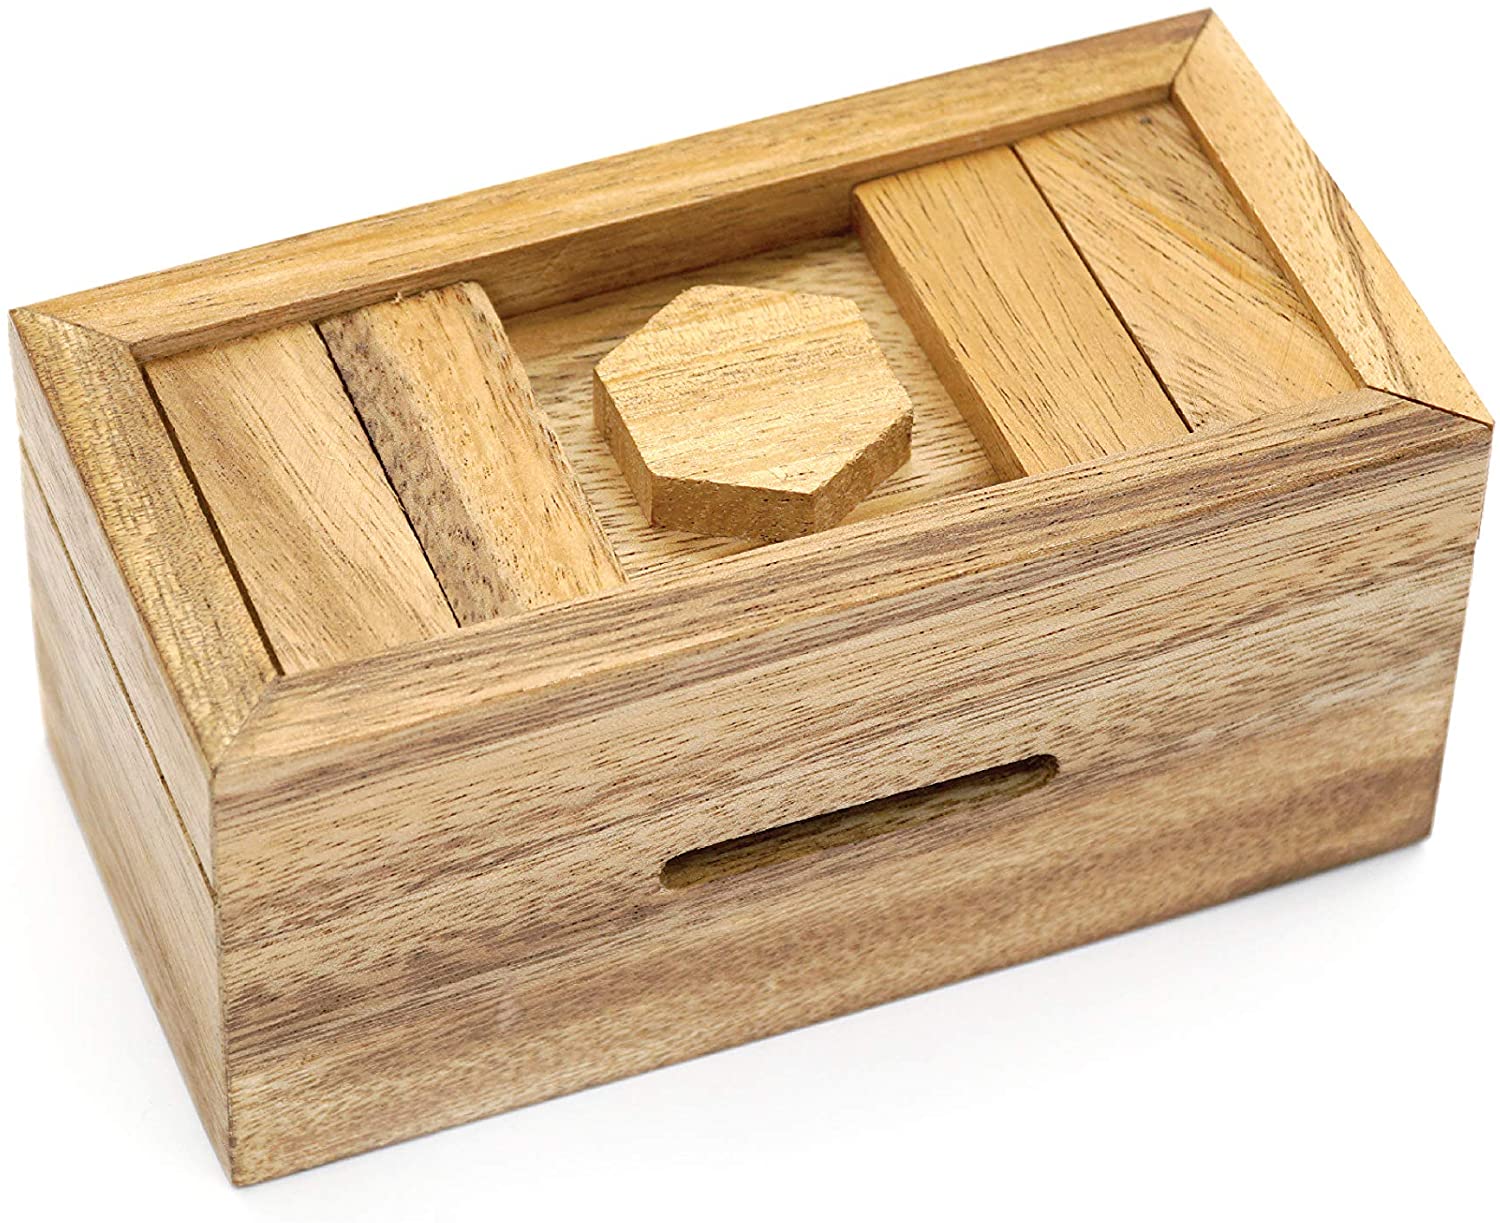 Puzzle Gift Case Box with Secret Compartments Wooden Money Box to Challenge 